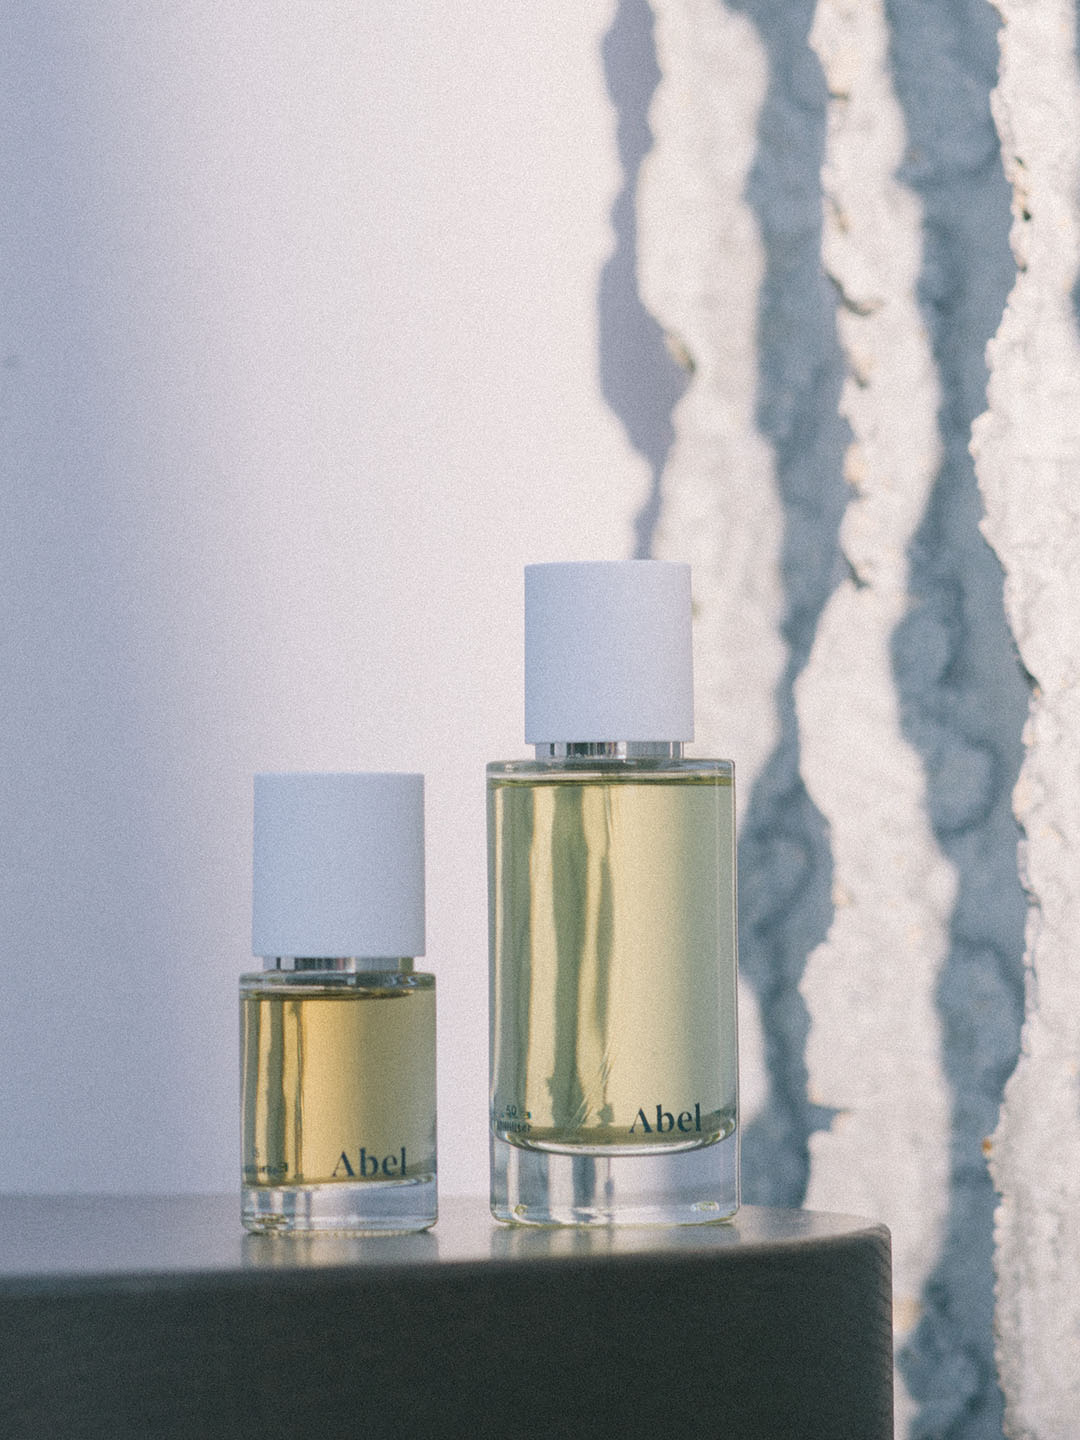 Two bottles of White Vetiver perfume by Abel on a ledge with a textured wall in the background, featuring natural eau de parfum.